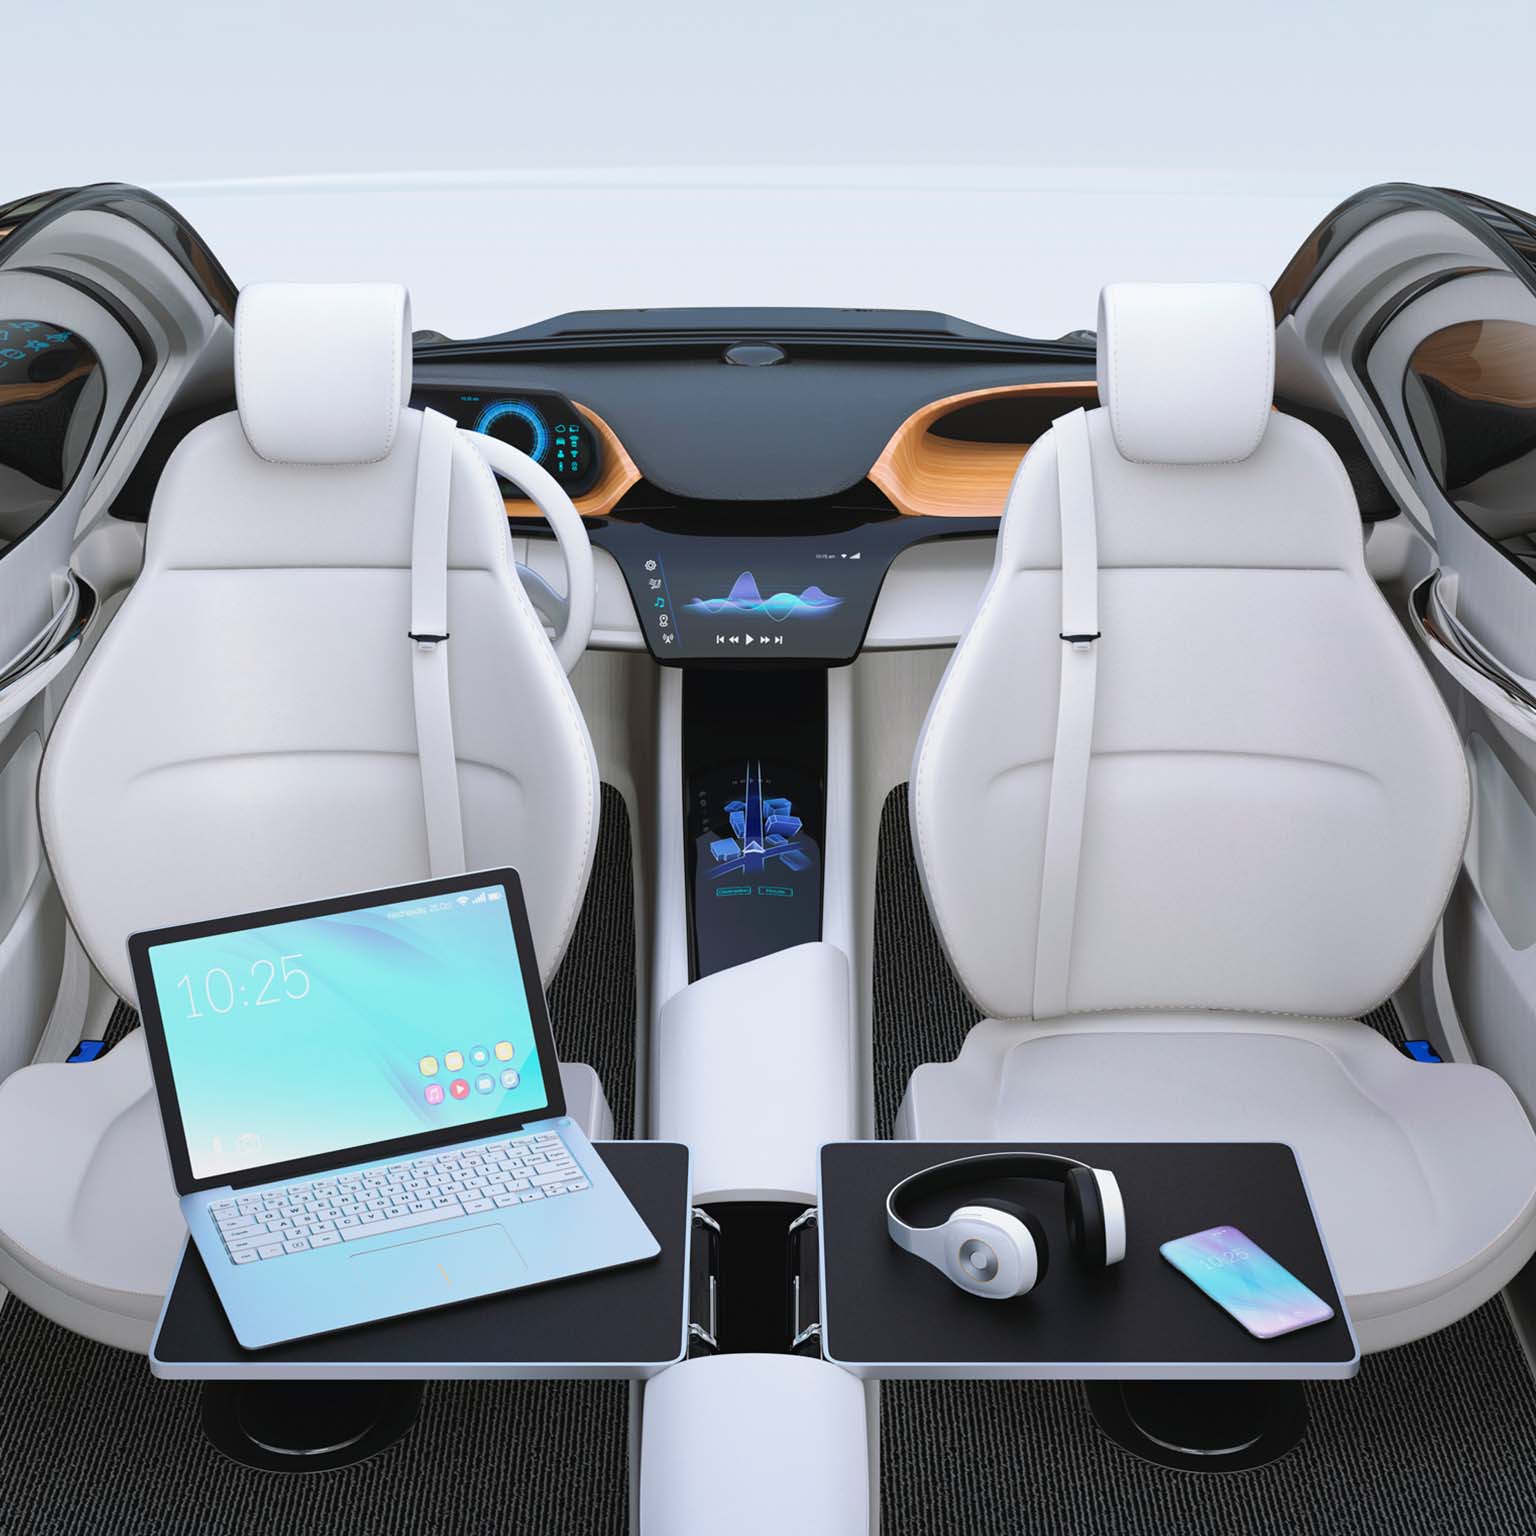 The future of car interiors in automotive